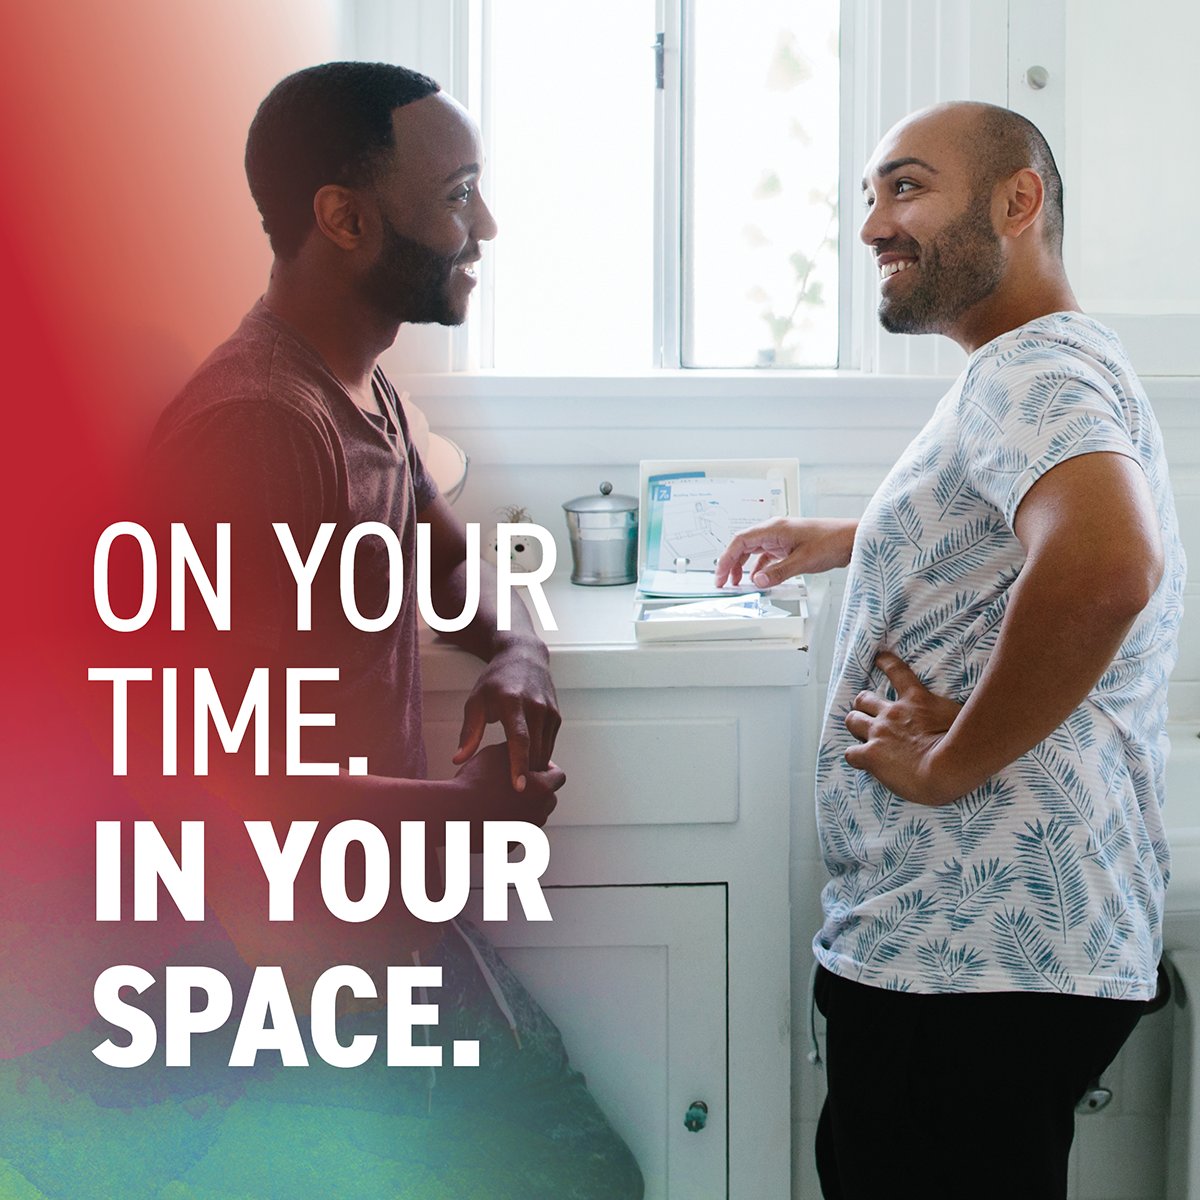 HIV self-tests are a great way to learn your #HIV status on your own time & in your own space. Make plans to get tested on 6/27, Nat'l #HIVTestingDay. For resources:
townspeople.org/resources/hiva…

#TownspeopleSD #Townspeople_SD #SanDiego #StopHIVTogether #HIVTesting #NHTD #PrideMonth